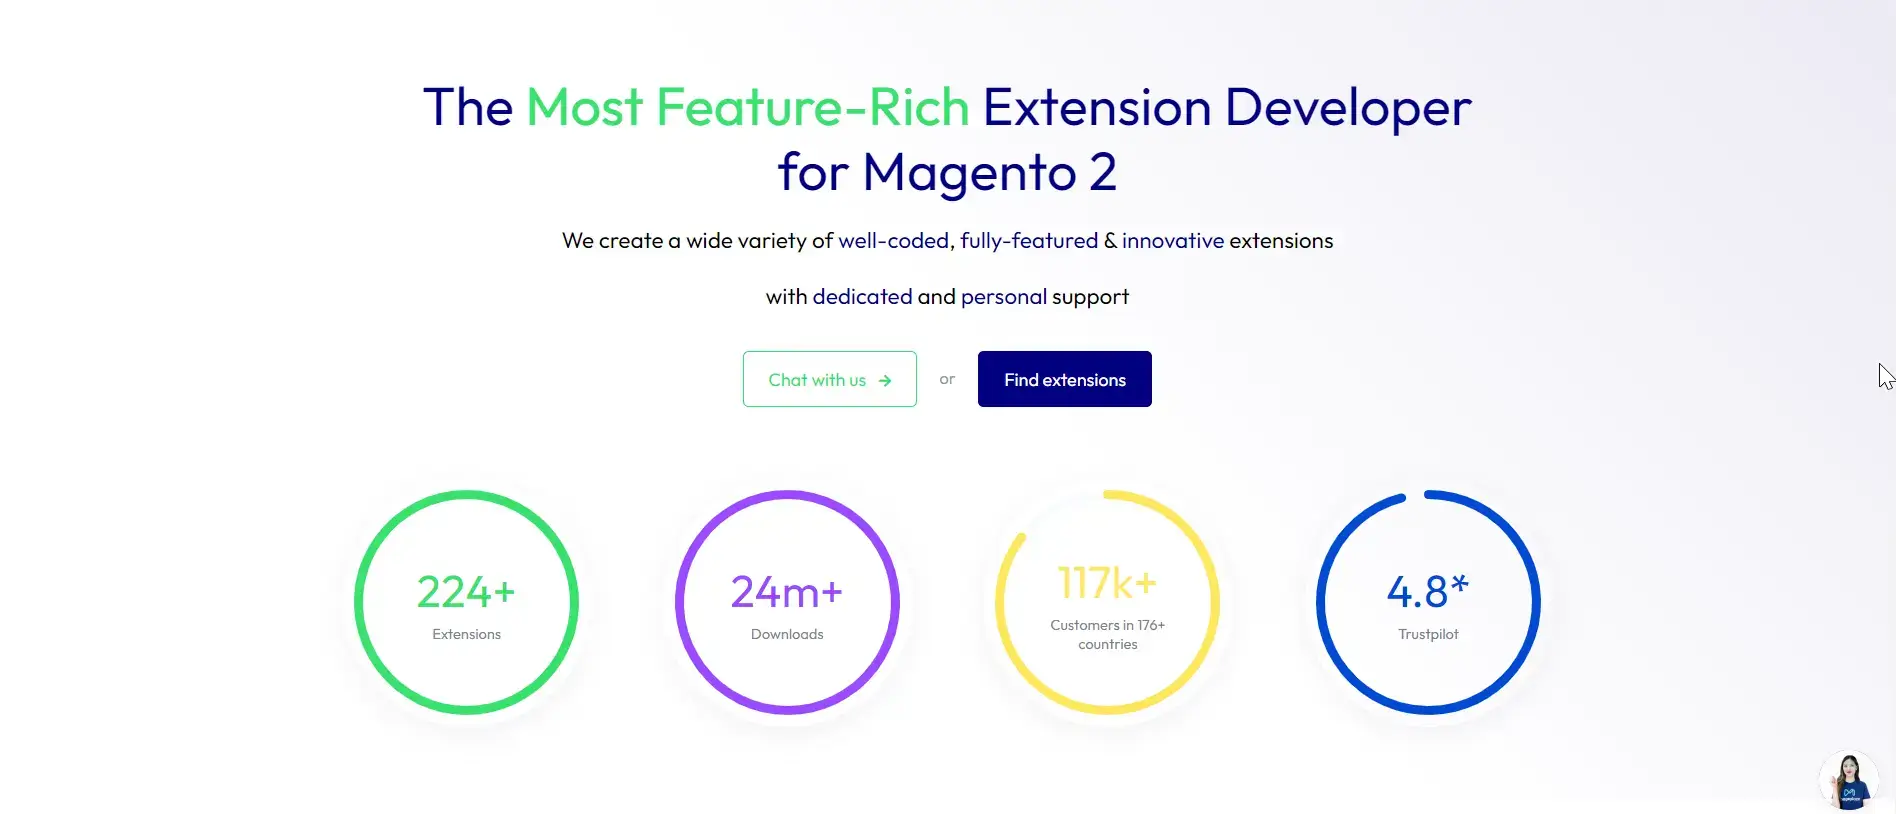 Mageplaza has empowered more than 110,000 clients in 180 countries since its launch in 2014.